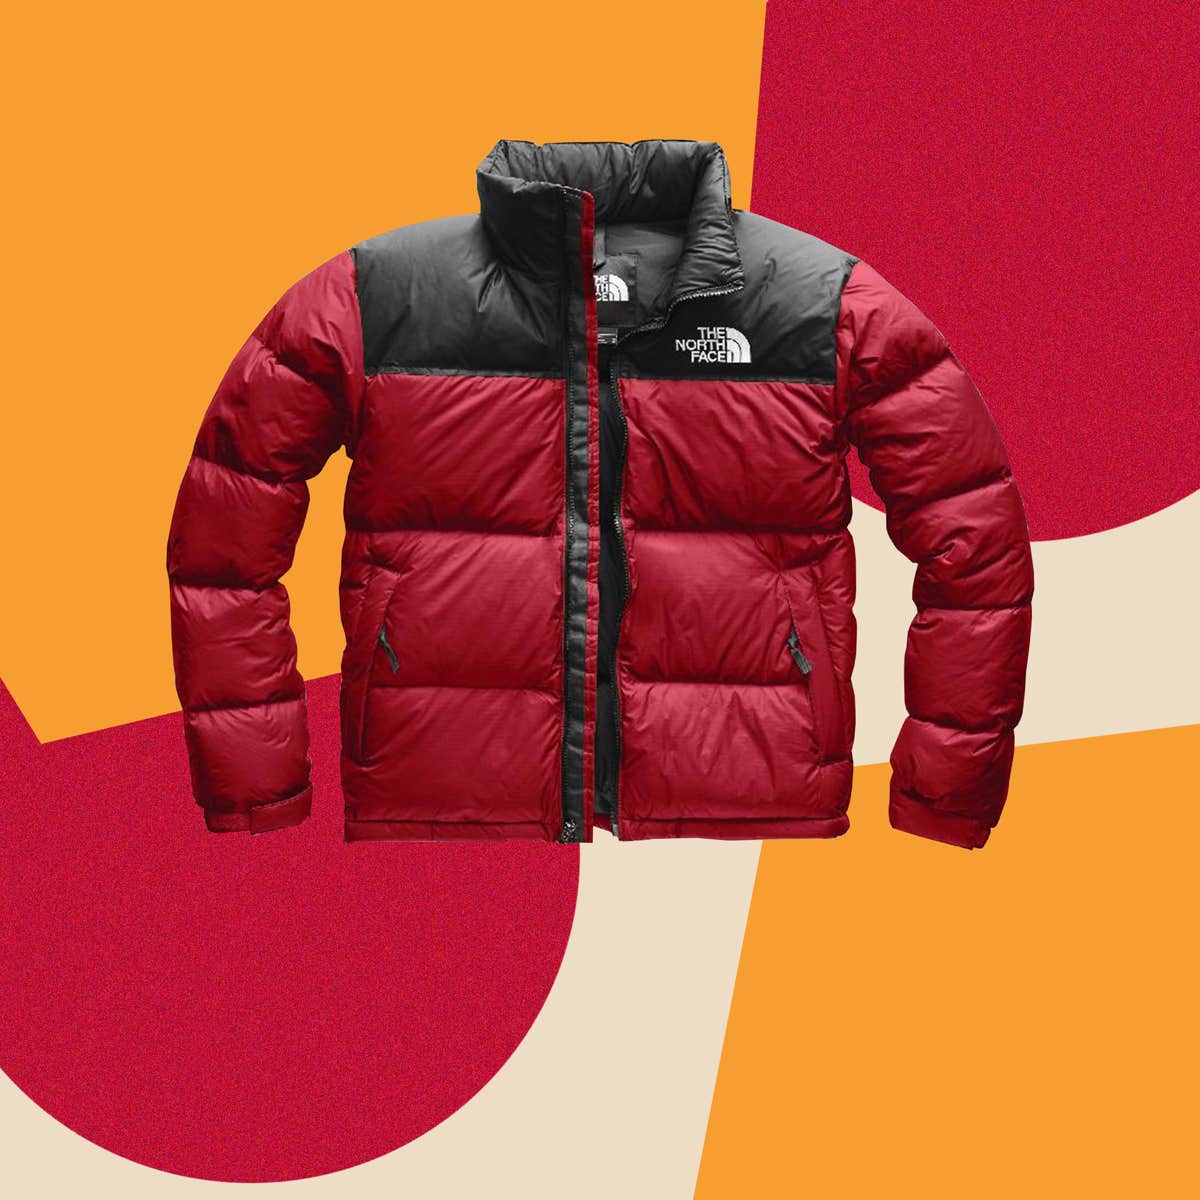 North Face 1992 Nuptse Puffer Jacket Is Back In Style